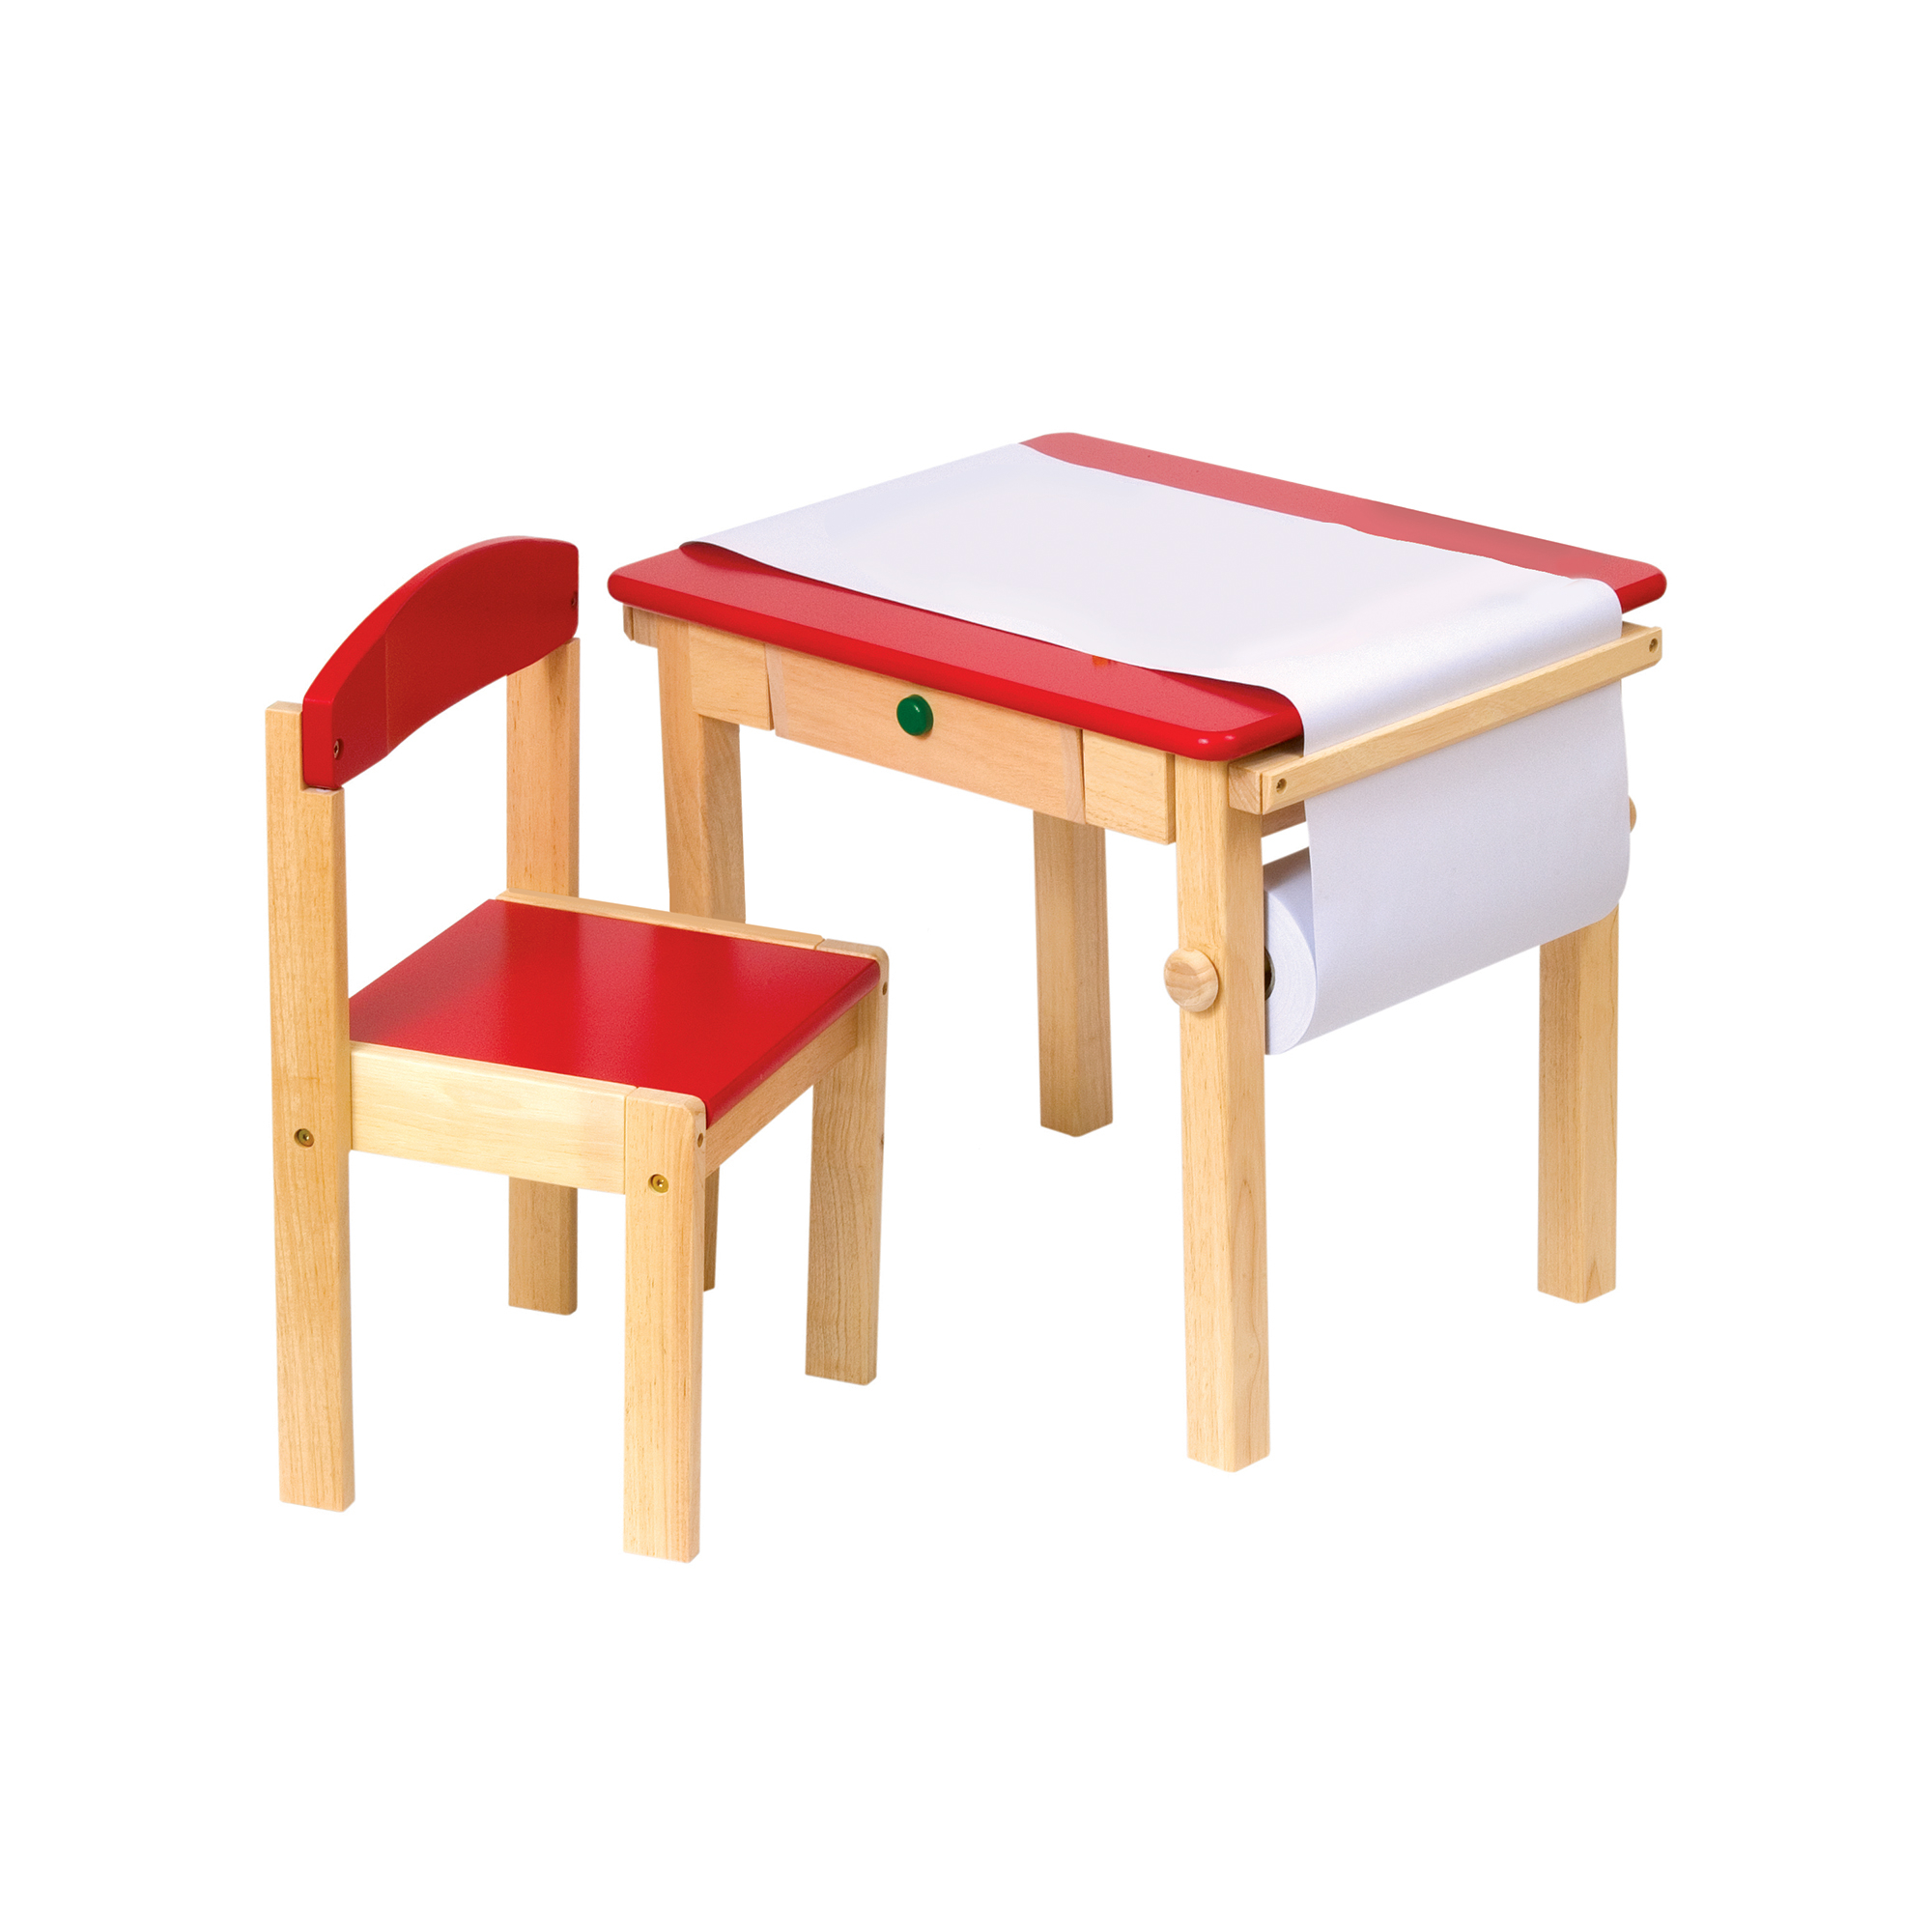 small wooden childrens table